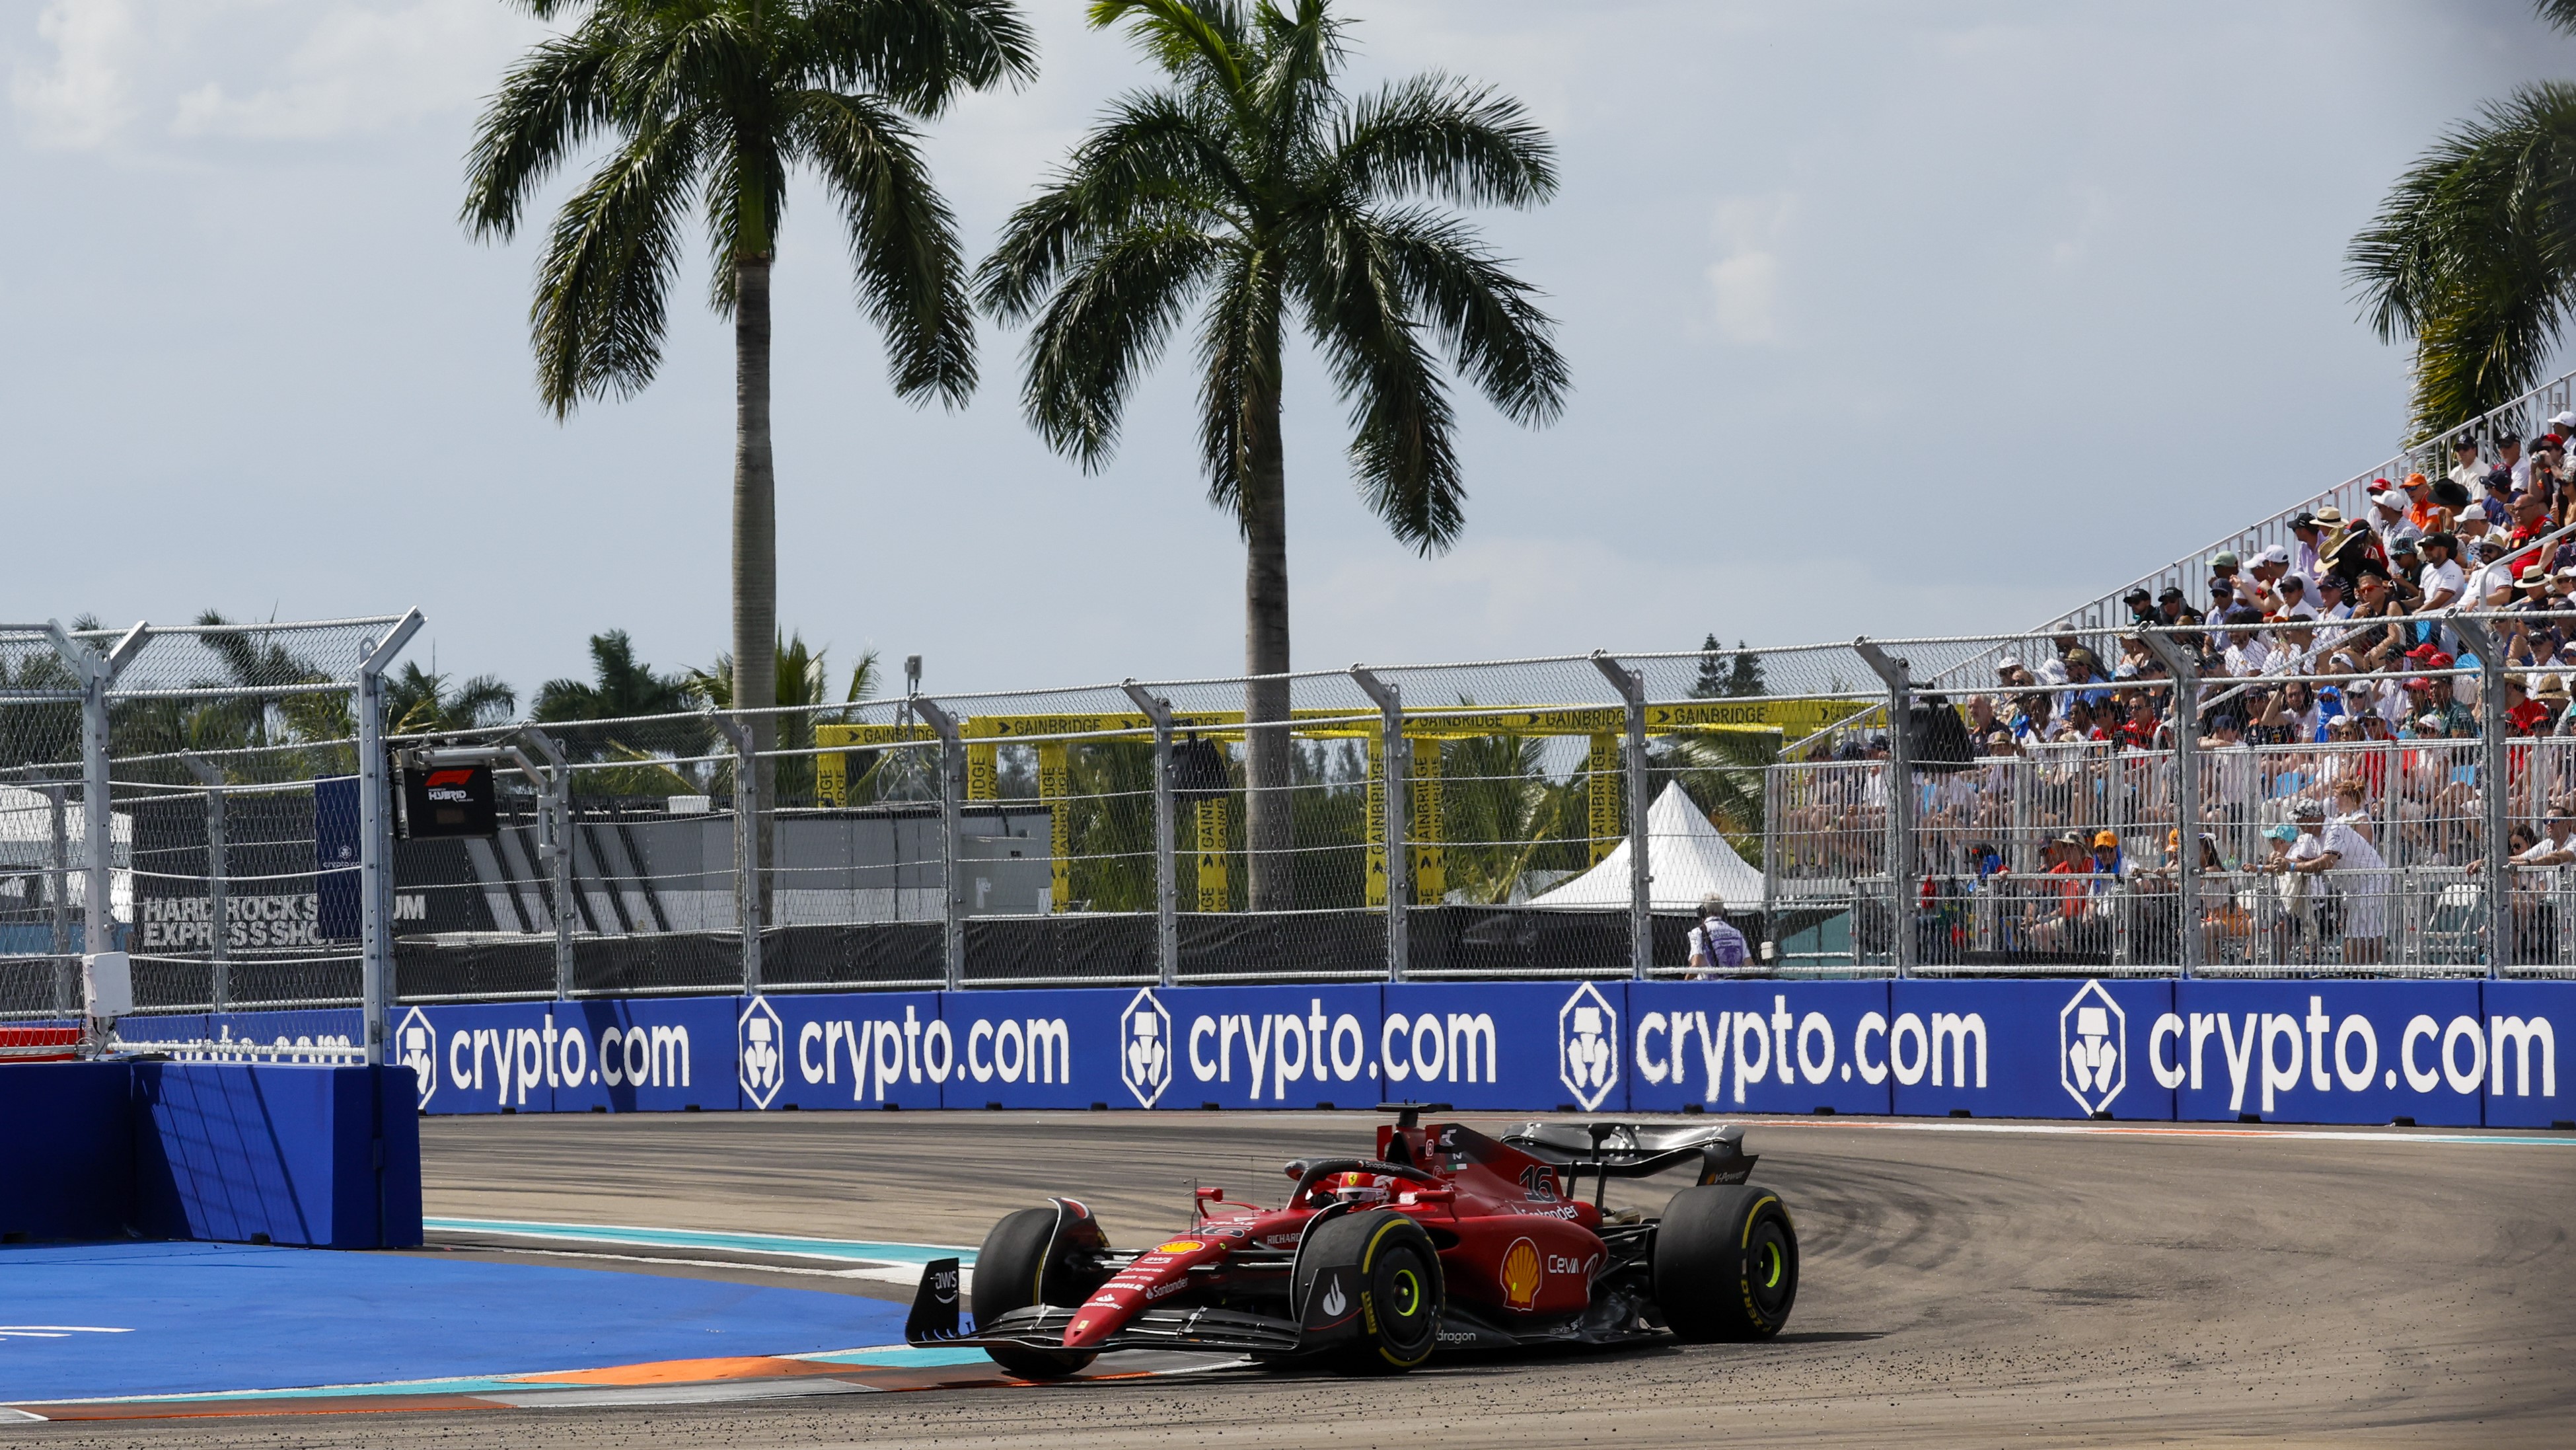 Miami Grand Prix live stream how to watch F1 online from anywhere Race Day TechRadar